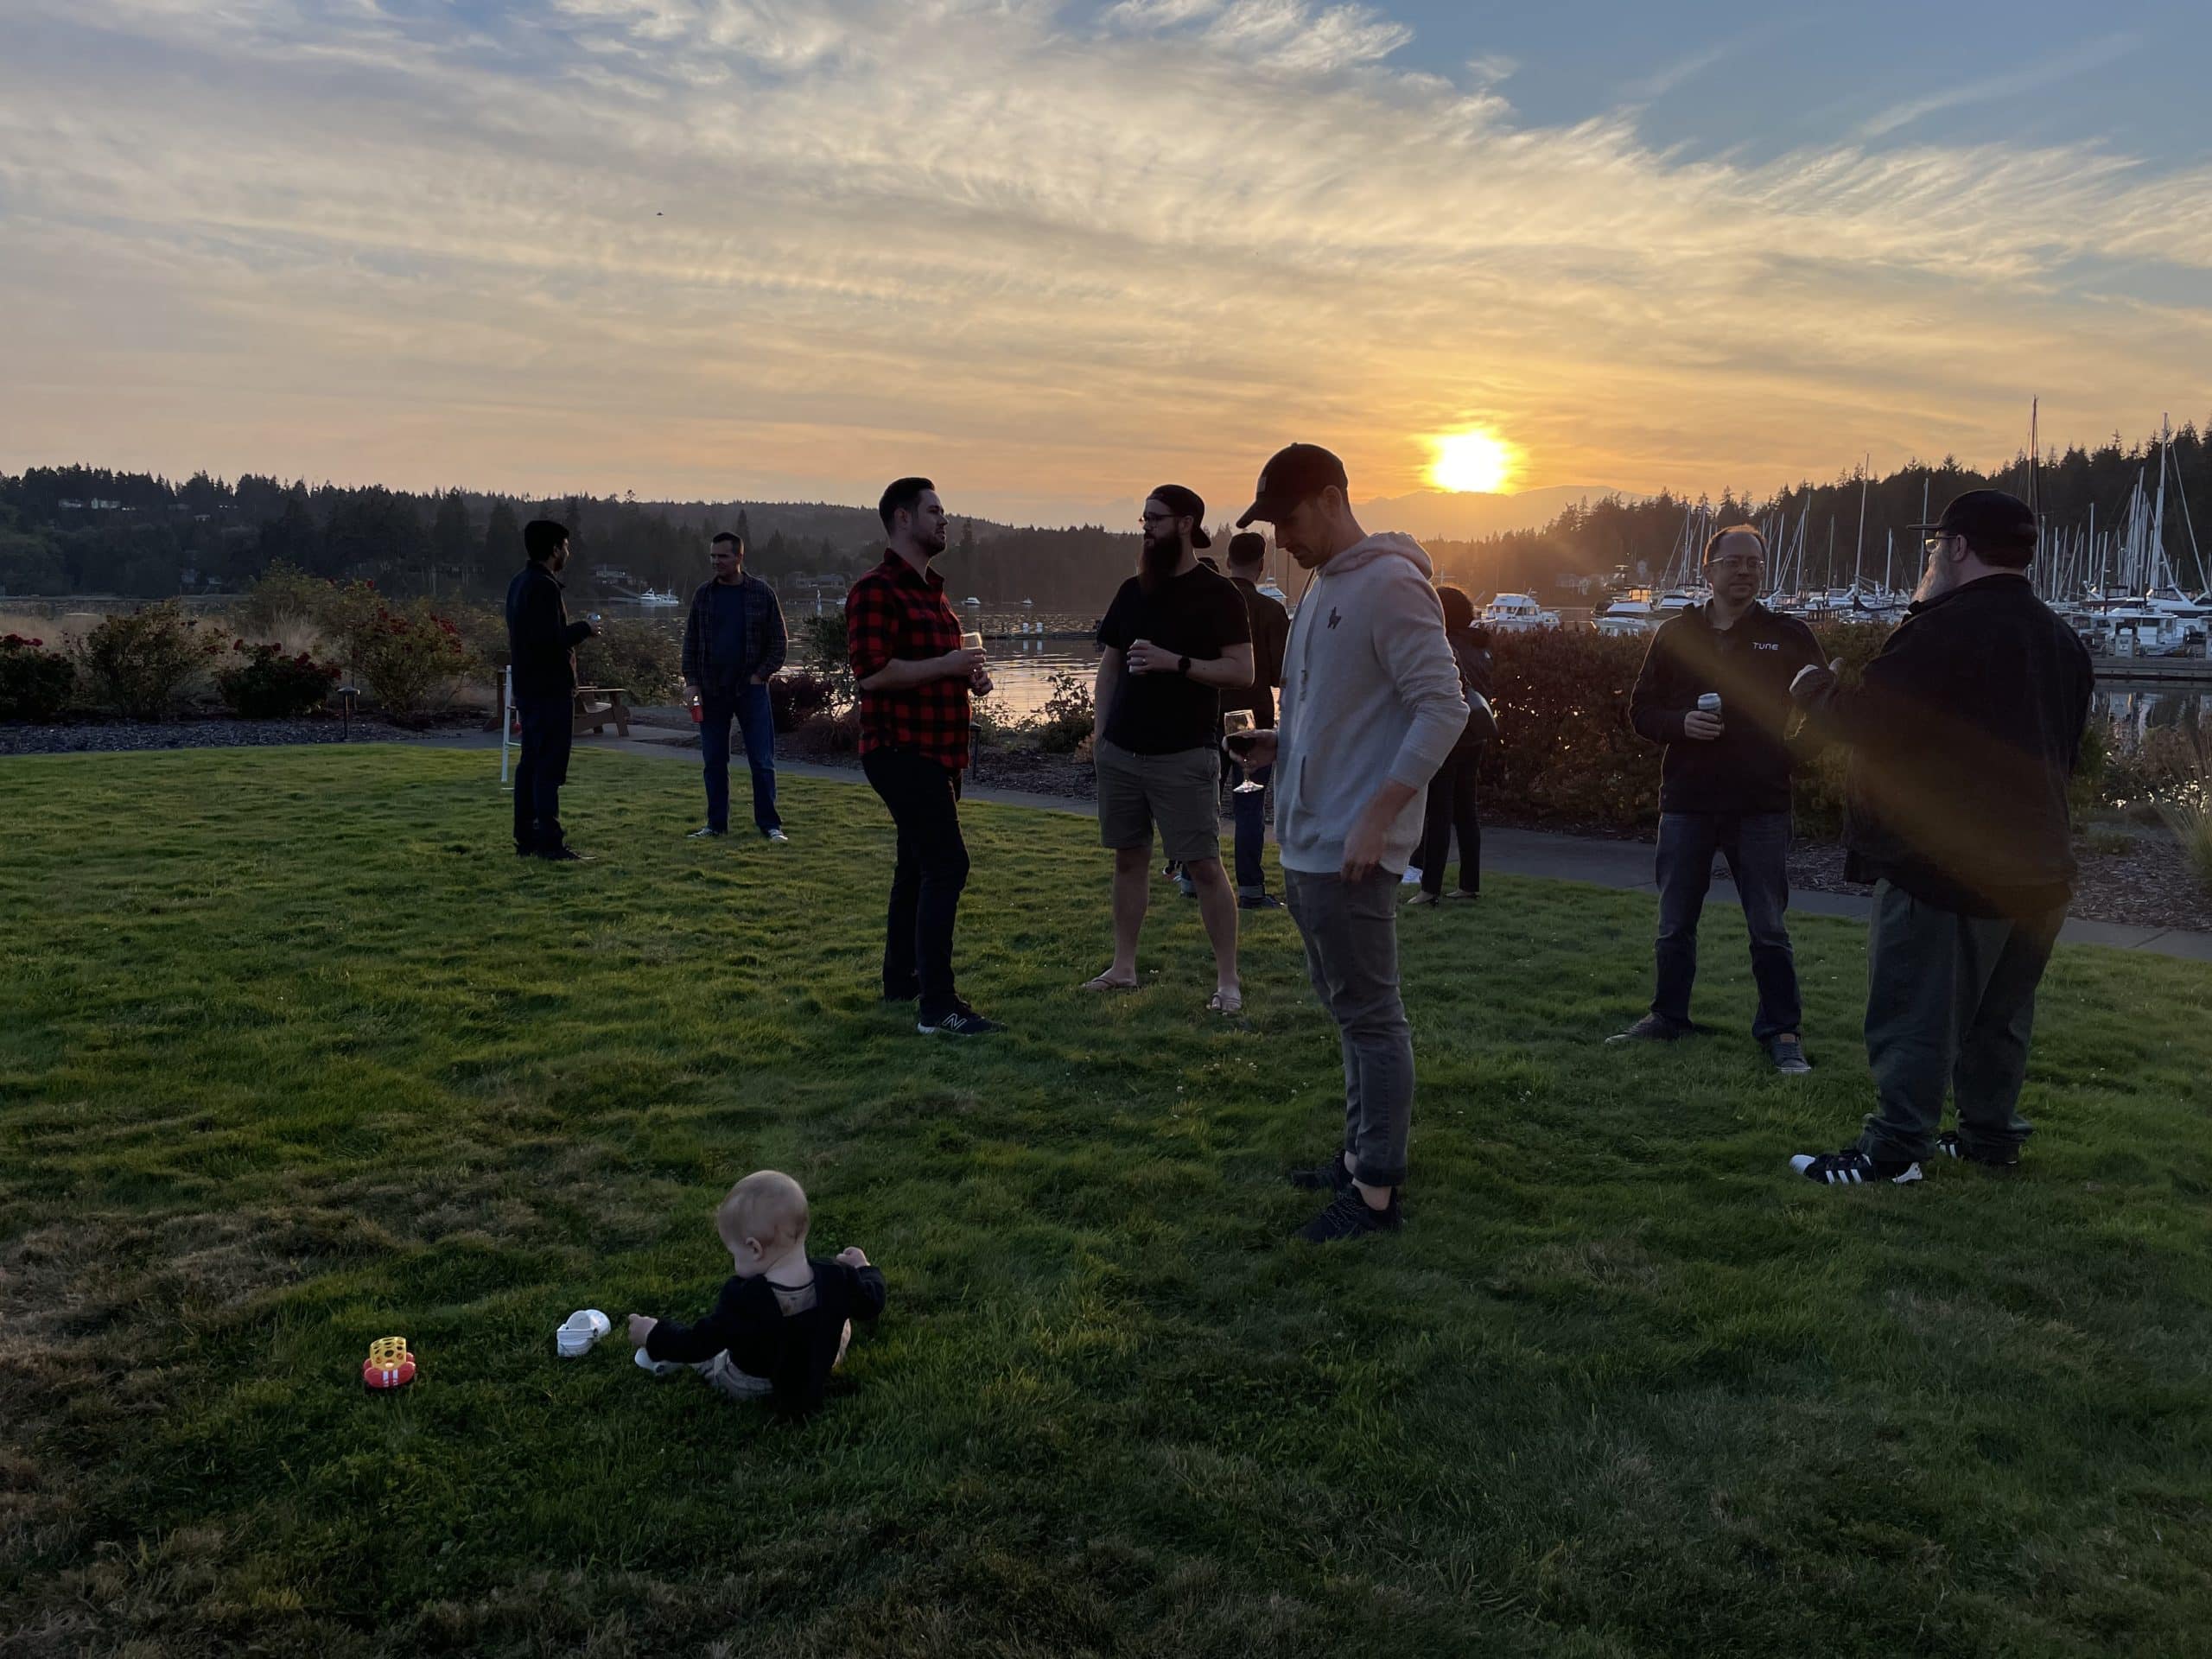 A well-behaved baby, beautiful sunsets, and quality time with coworkers were standard at the 2022 TUNE retreat